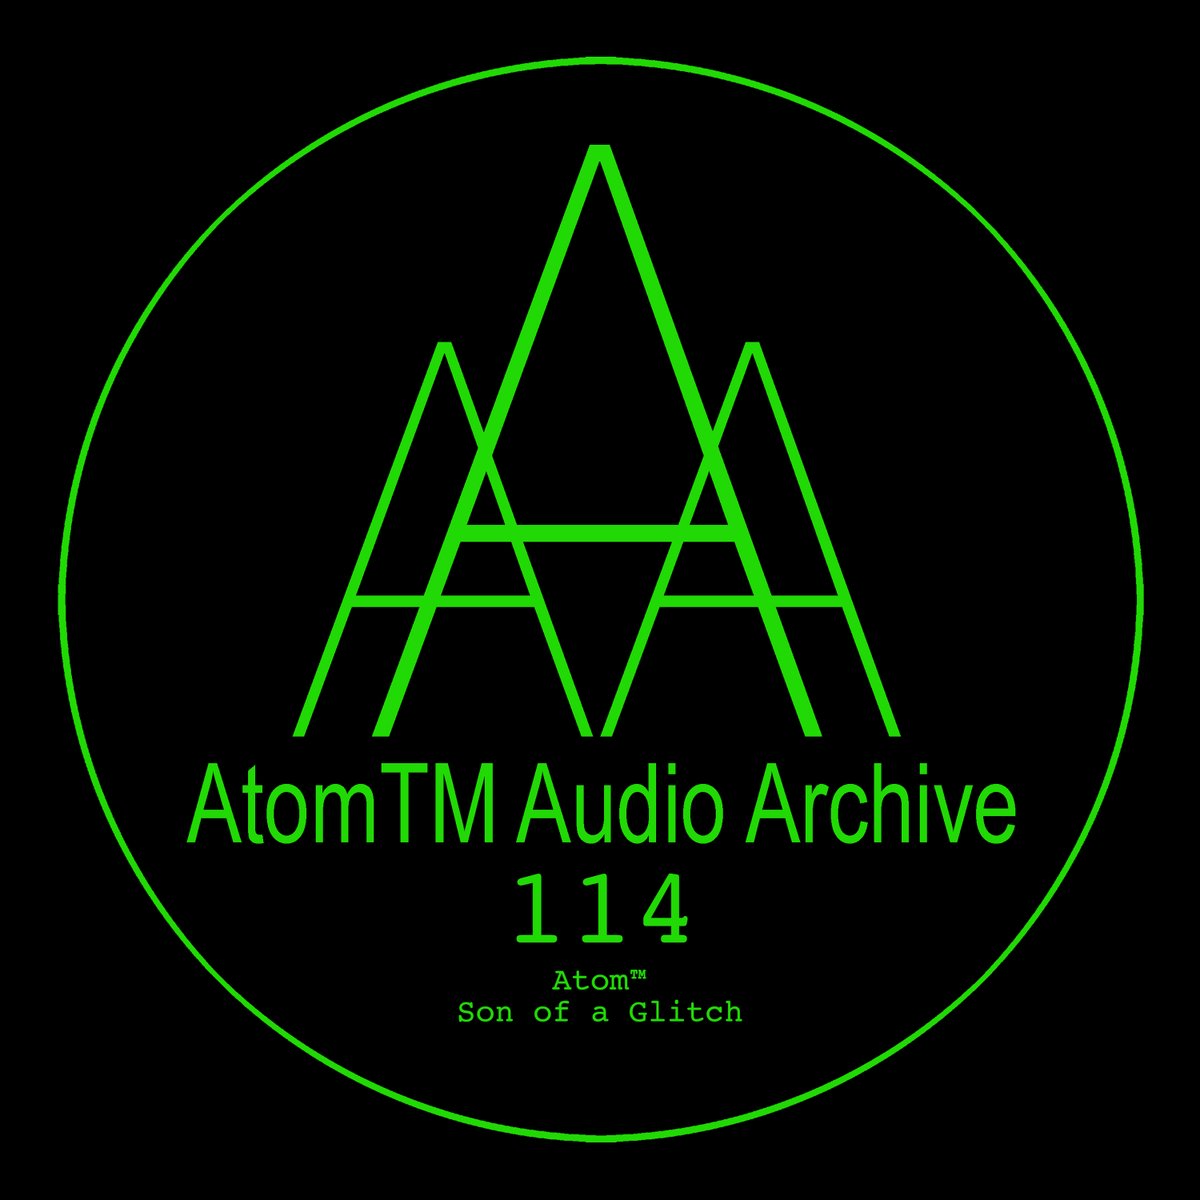 PSEUDO RANDOM NUMBER DISCOUNT 04/12024 50% discount on AAA 114 “AtomTM/Son of a Glitch“. Discount code “114”. Available until April 30th. atomtm.bandcamp.com/album/son-of-a…